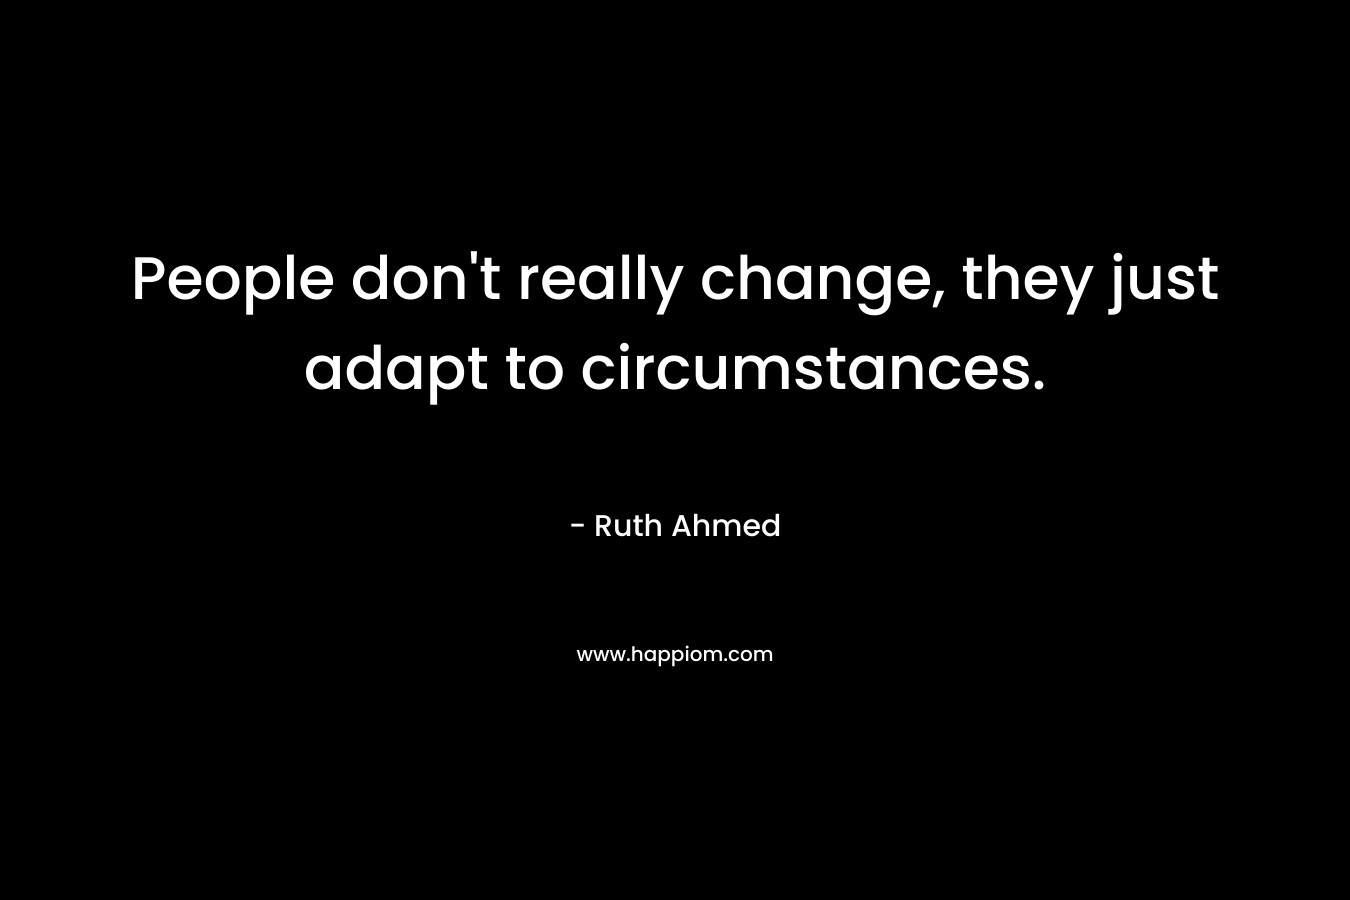 People don't really change, they just adapt to circumstances.